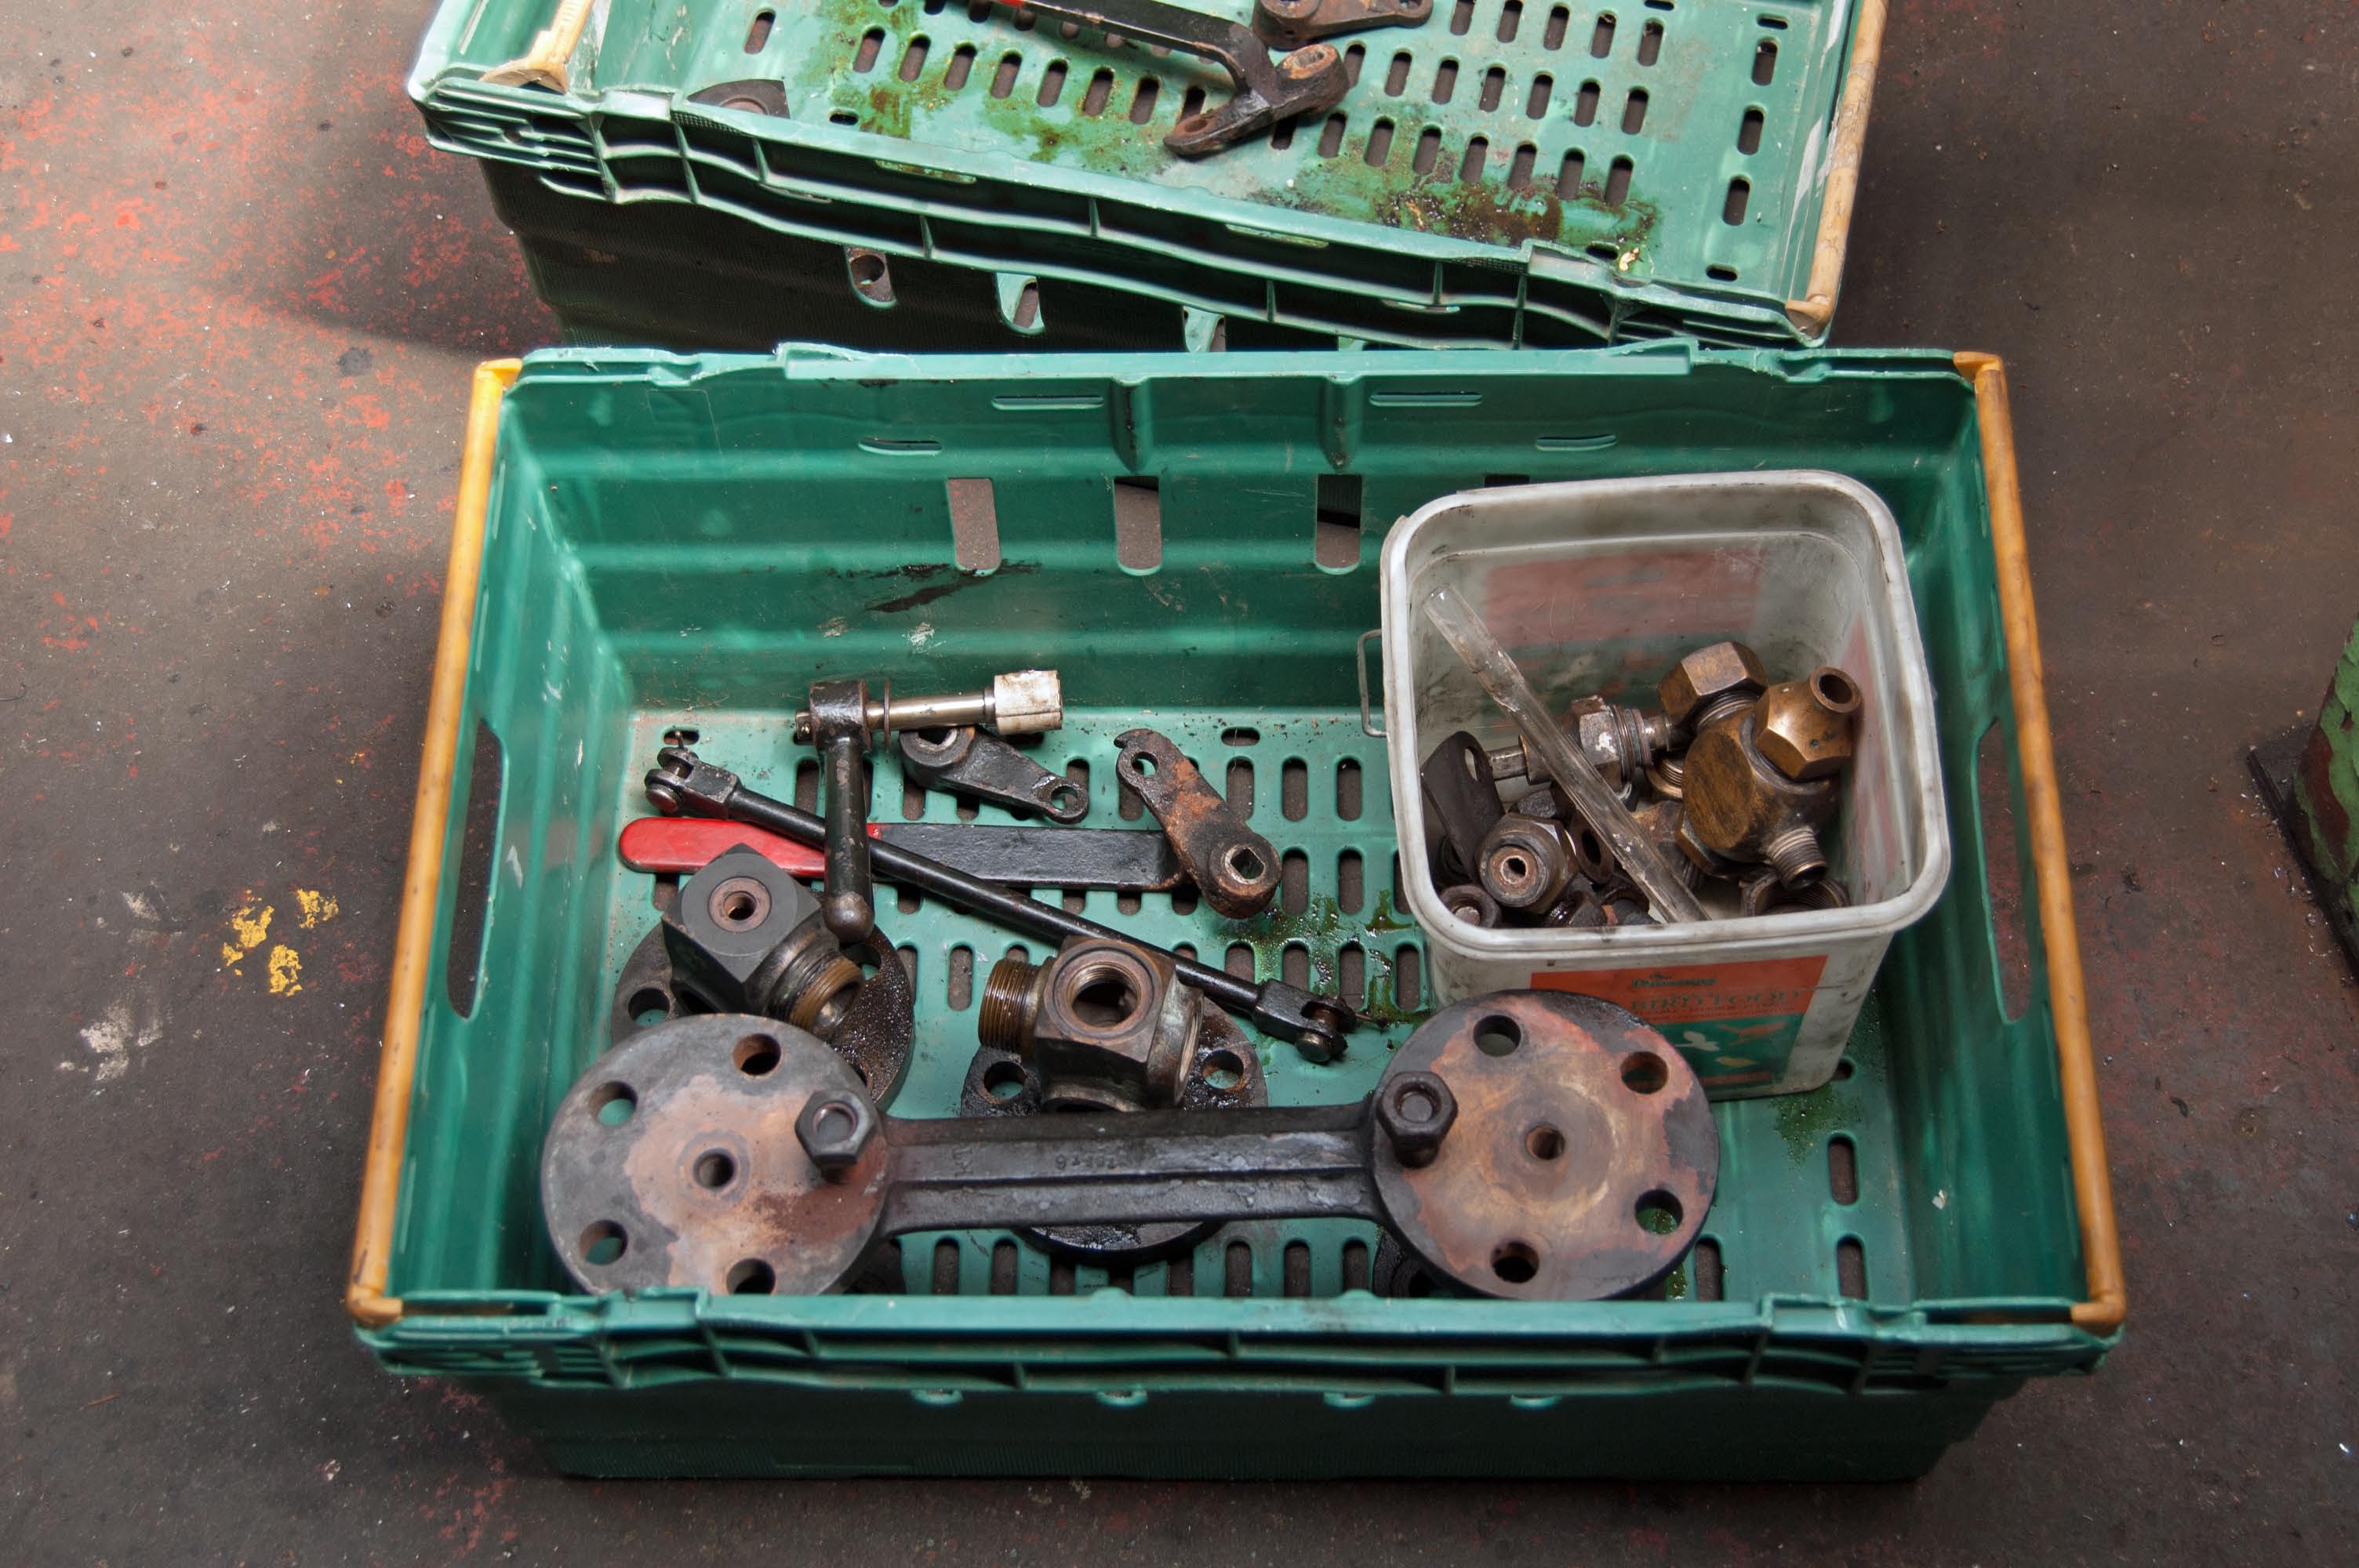 The parts of one of the dismantled gauge frames